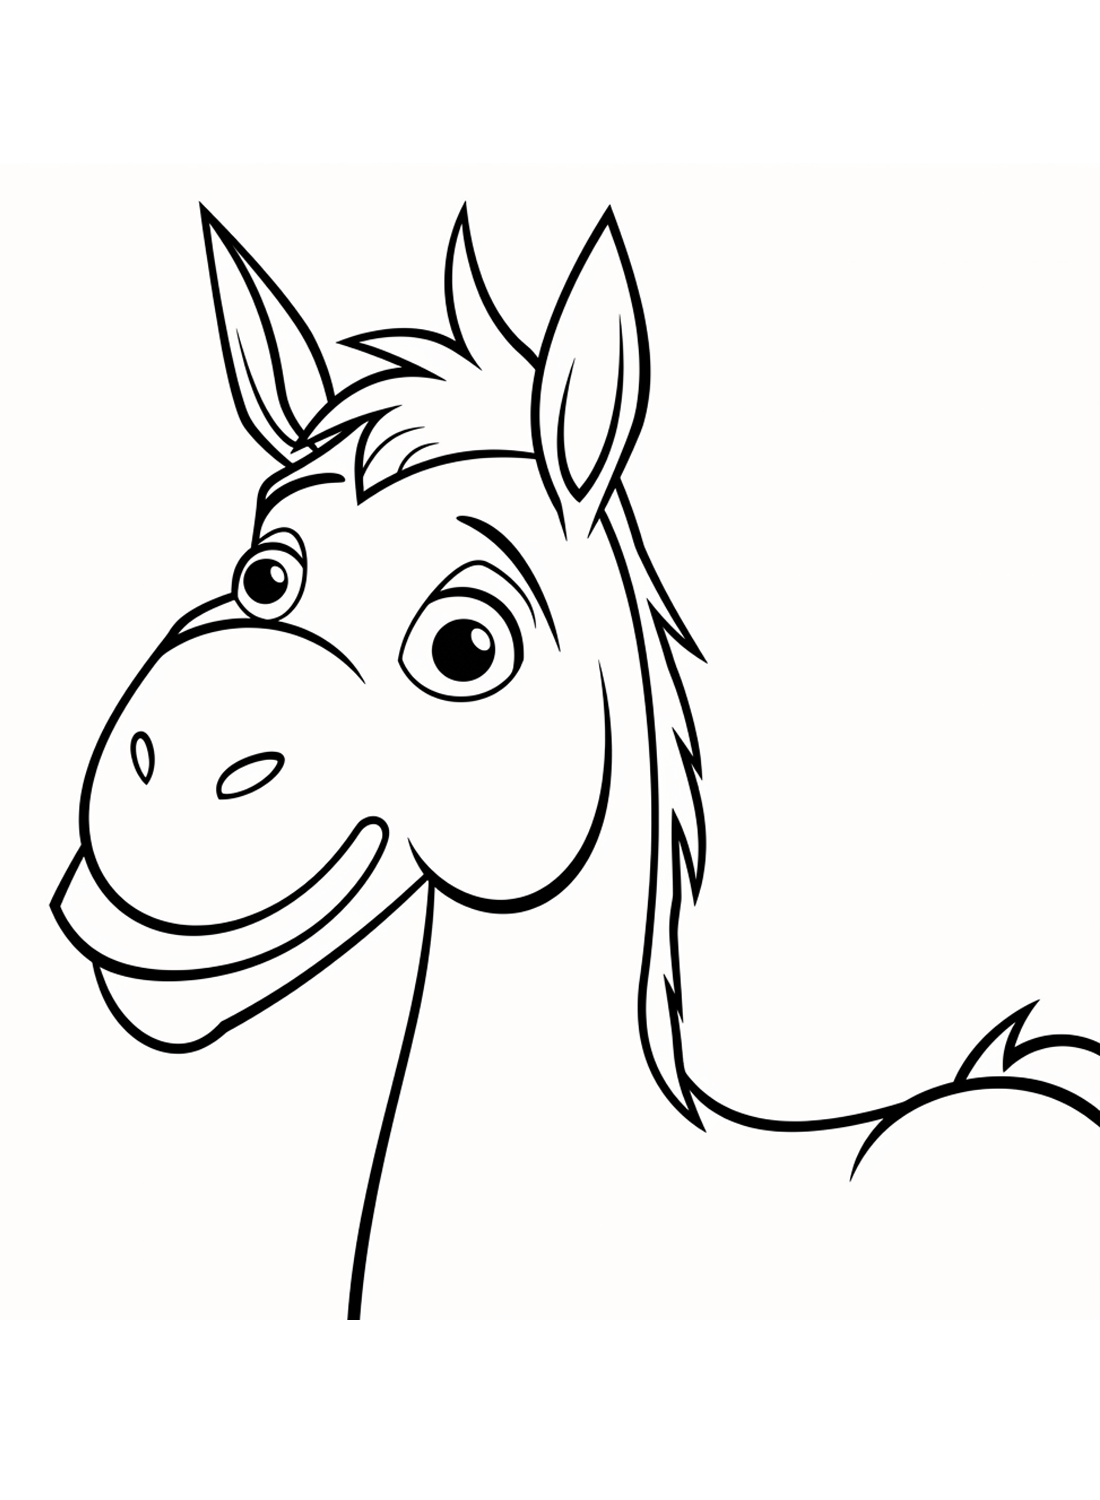 The Donkey Coloring Pages